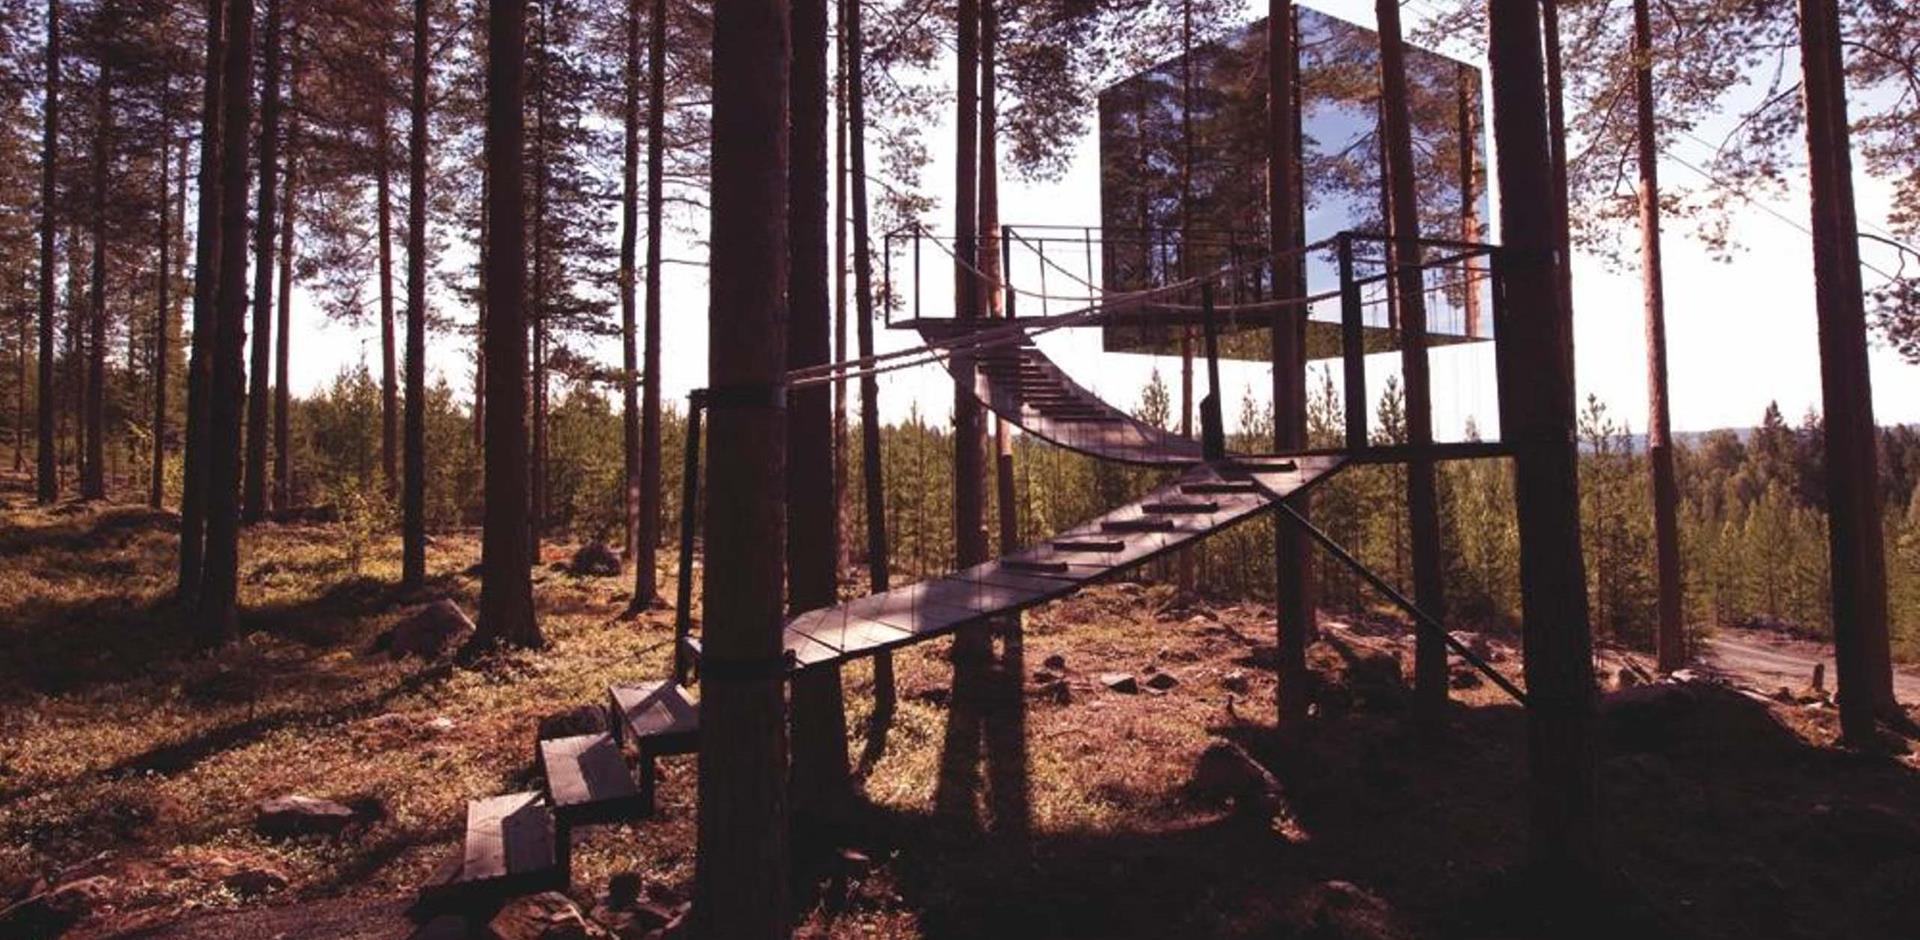 Mirror cube exterior, Treehouse, Sweden